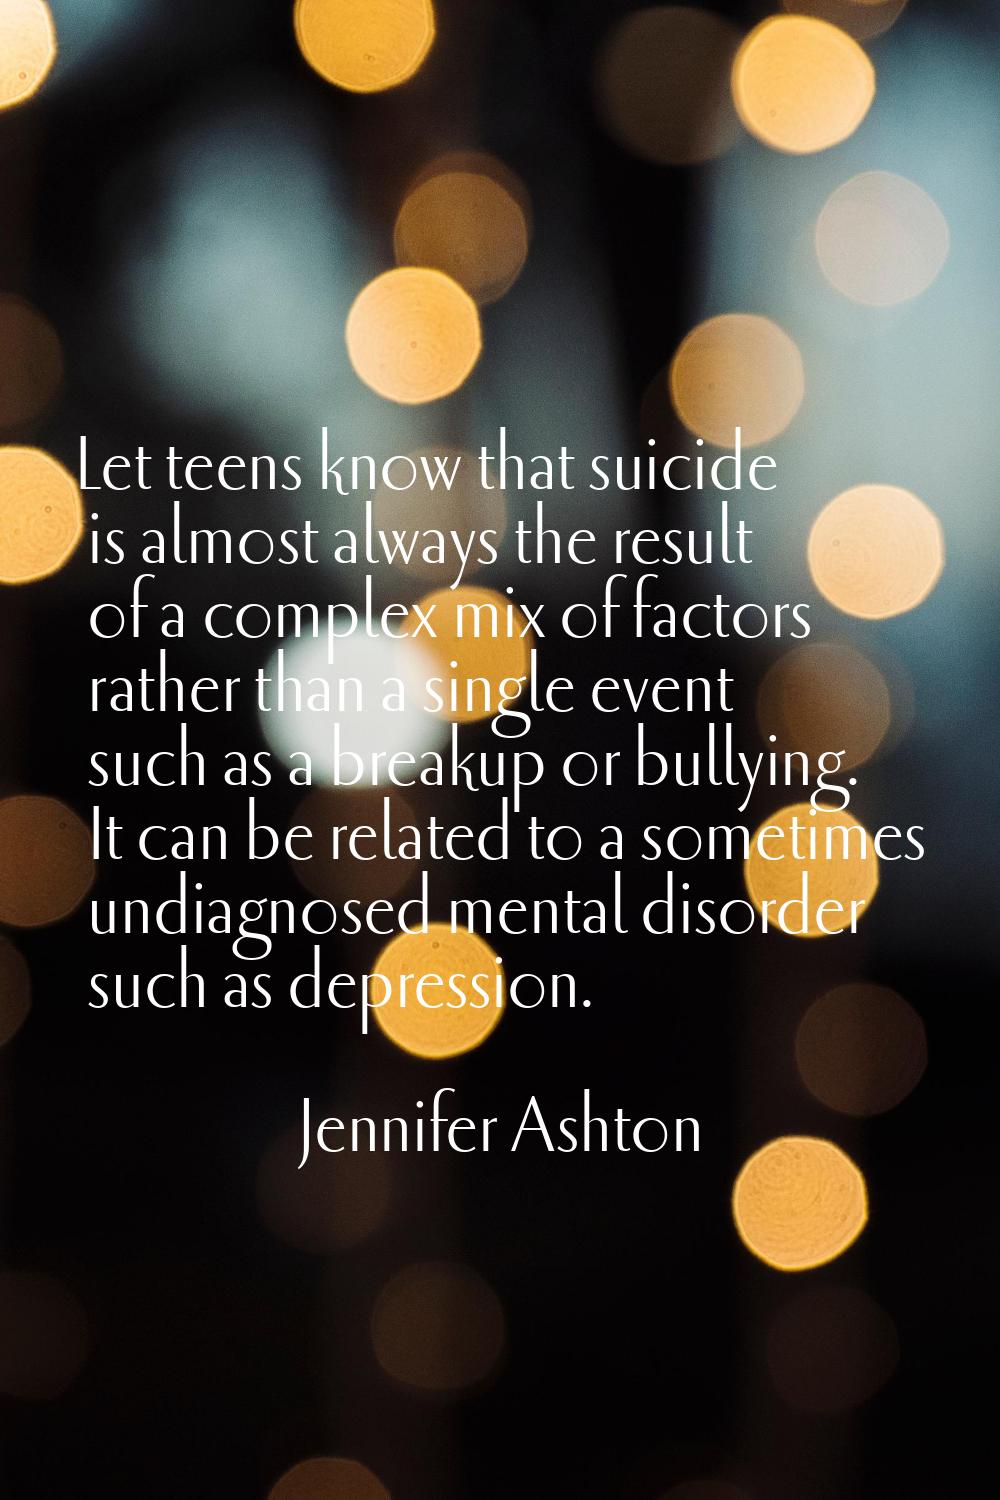 Let teens know that suicide is almost always the result of a complex mix of factors rather than a s